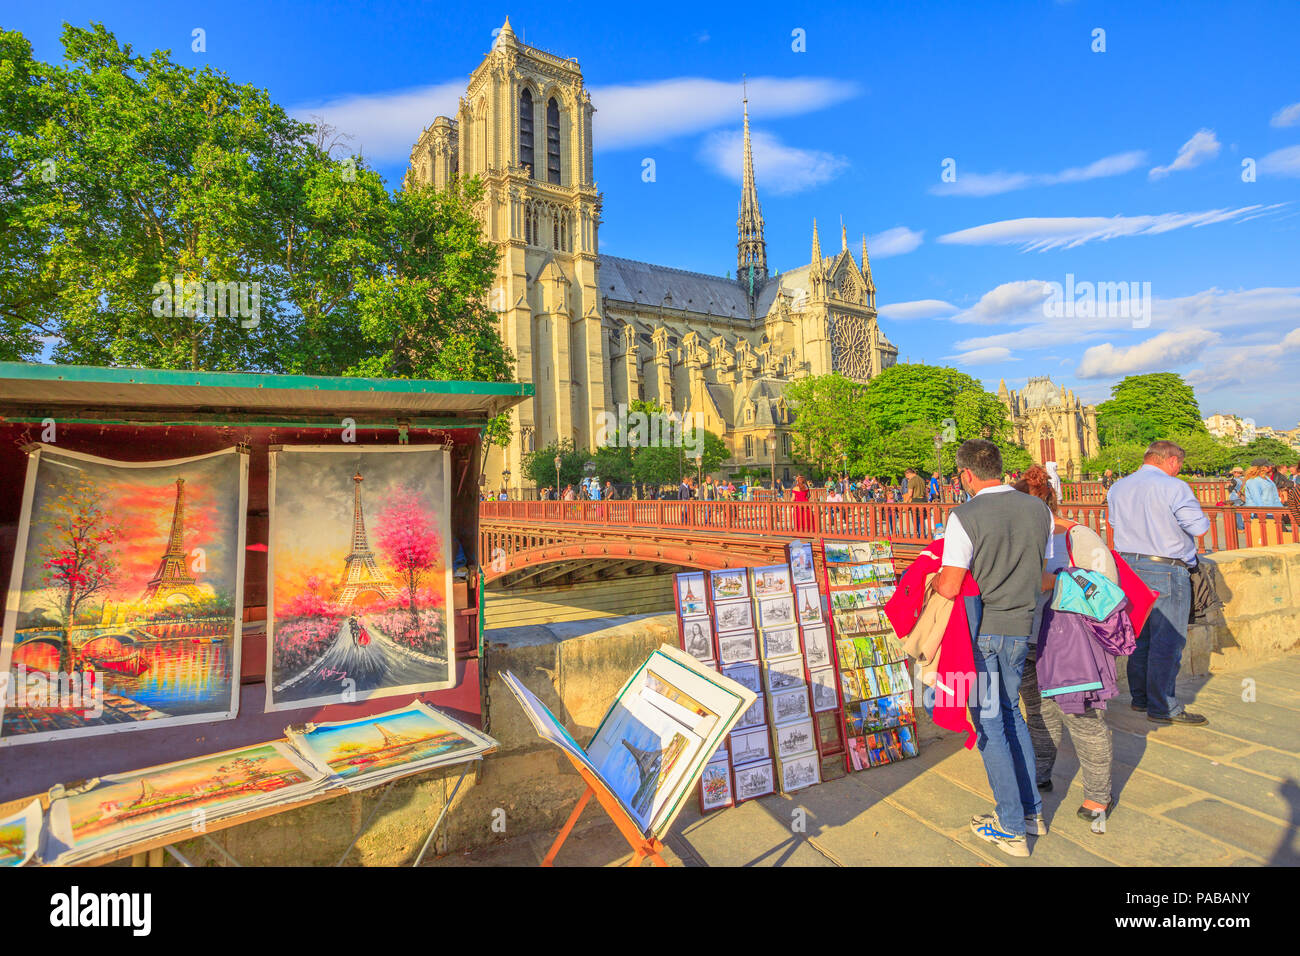 Paris, France - July 1, 2017: people looking at traditional Bouquiniste on the edge of Seine in front Notre-Dame cathedral. The Bouquinistes sell paintings of the Eiffel Tower and tourist souvenirs. Stock Photo